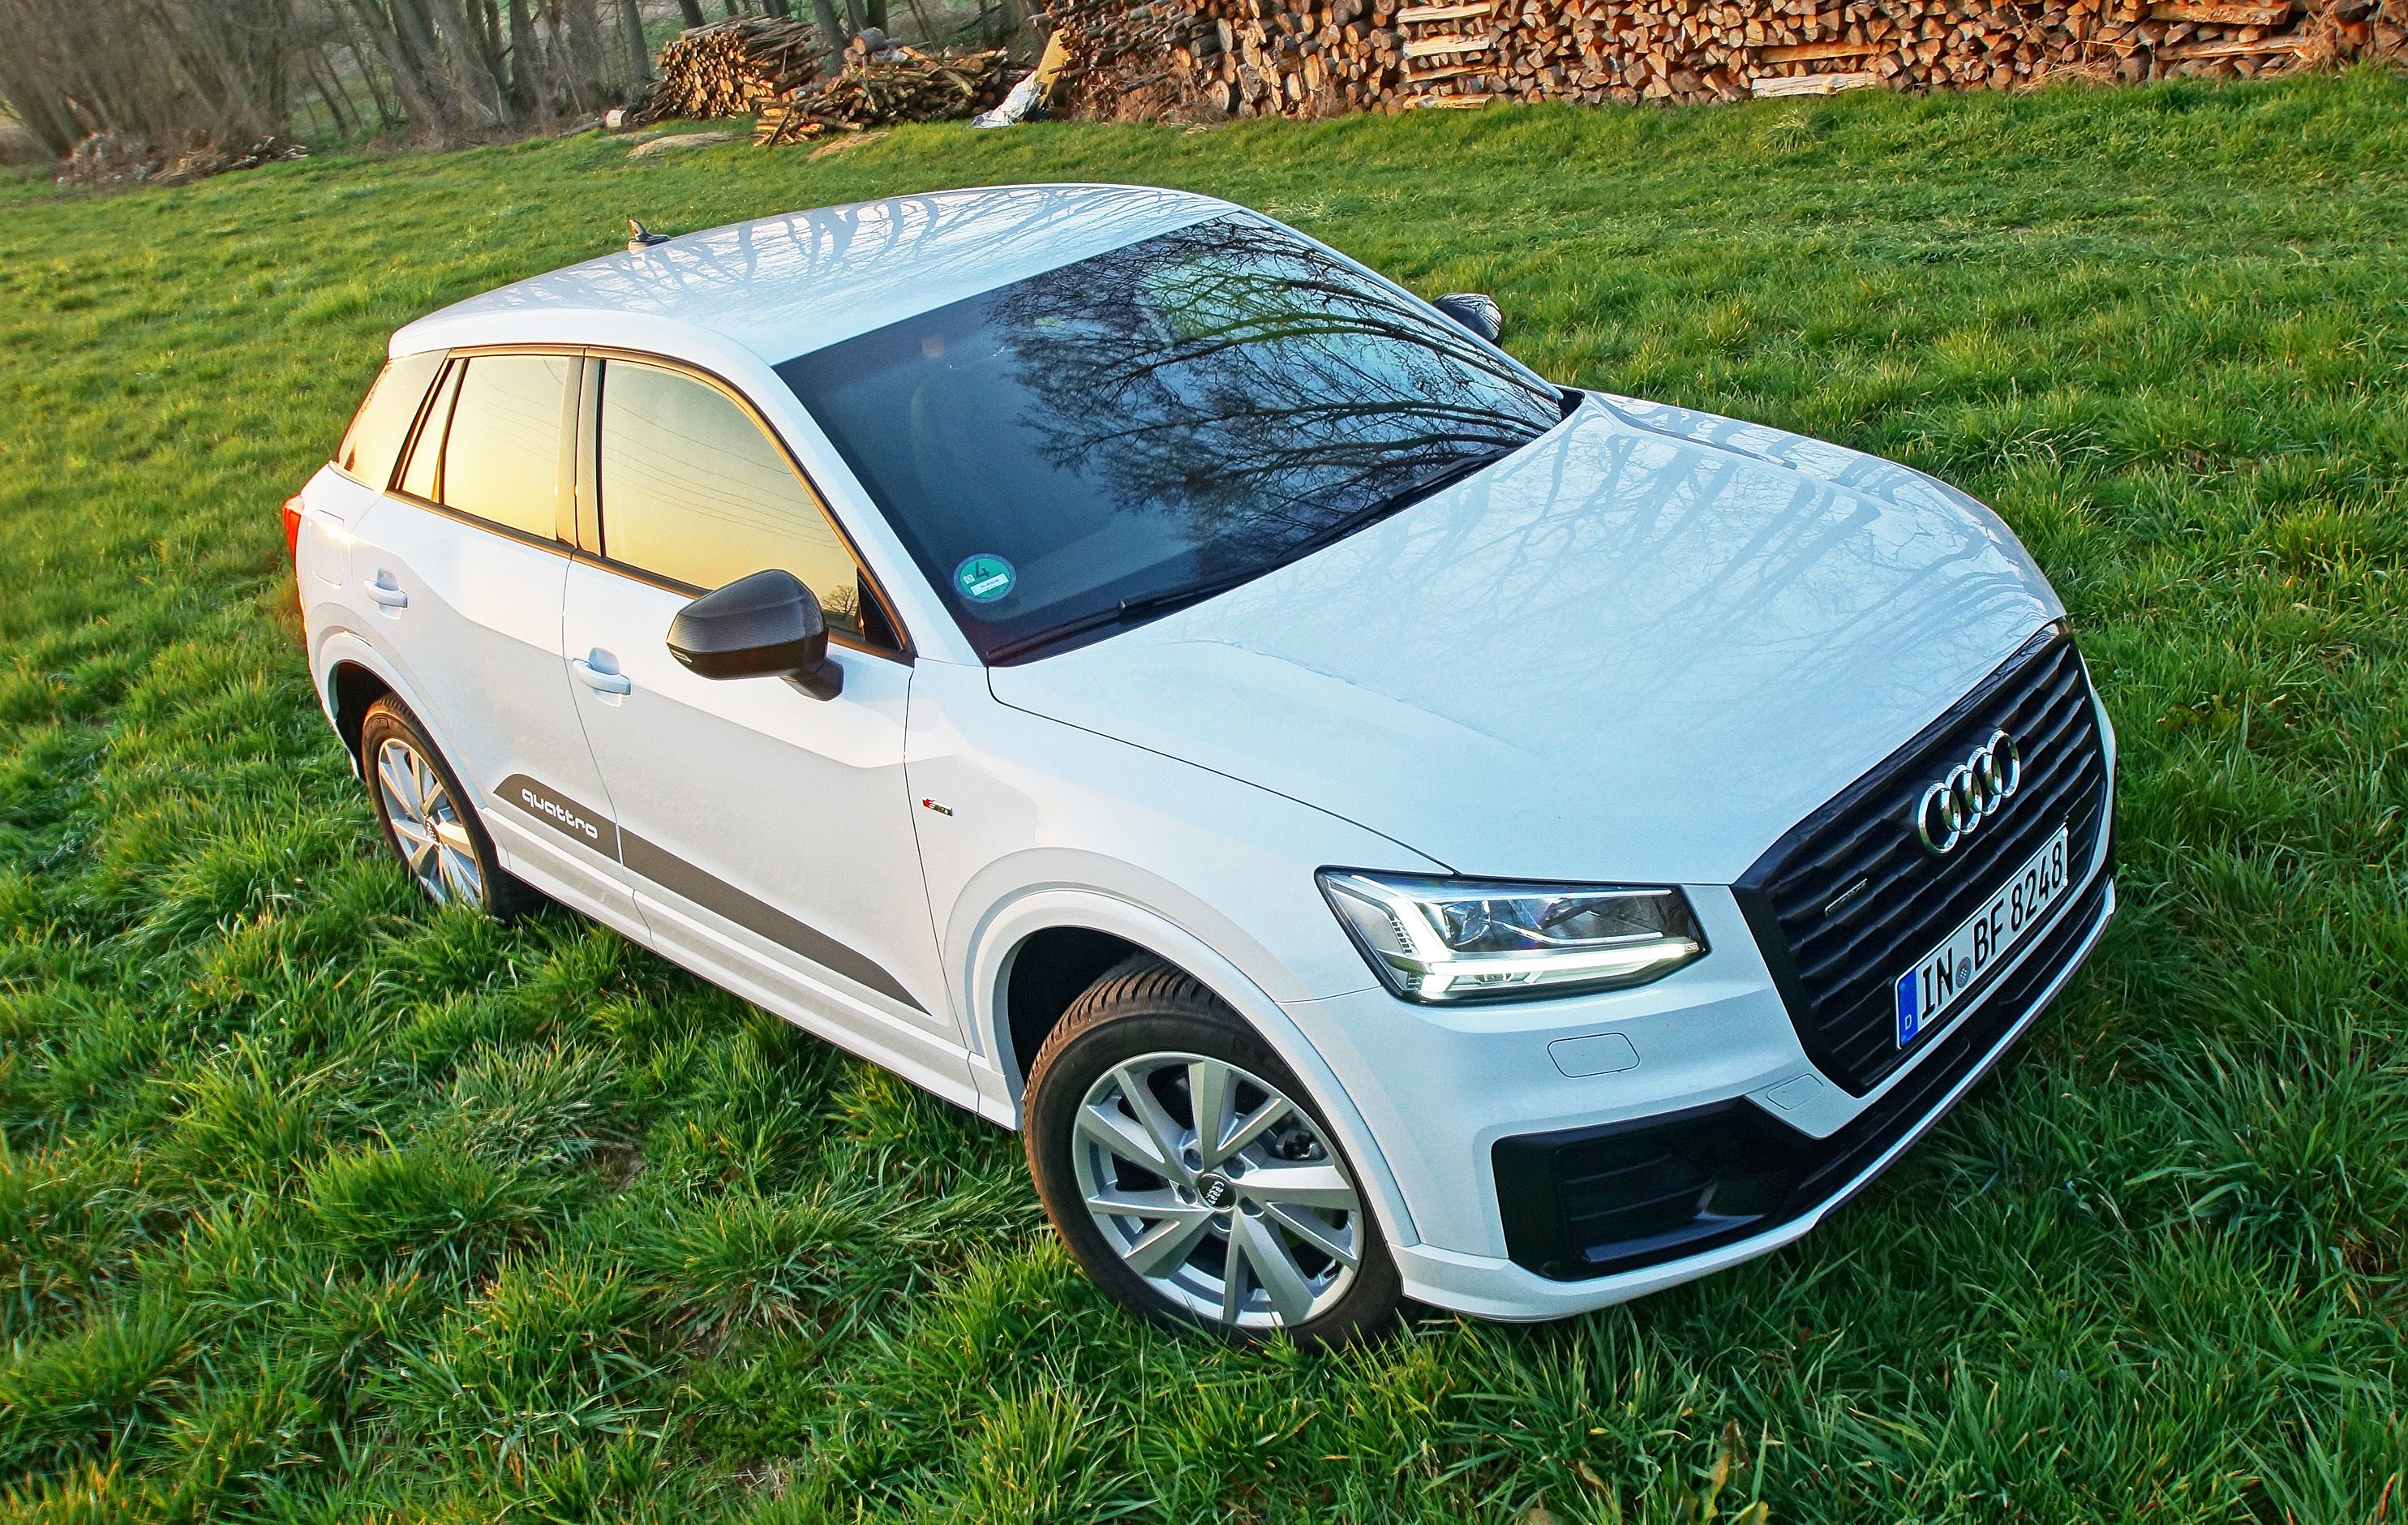 Small Q, big coup: The Audi Q2 in new top form